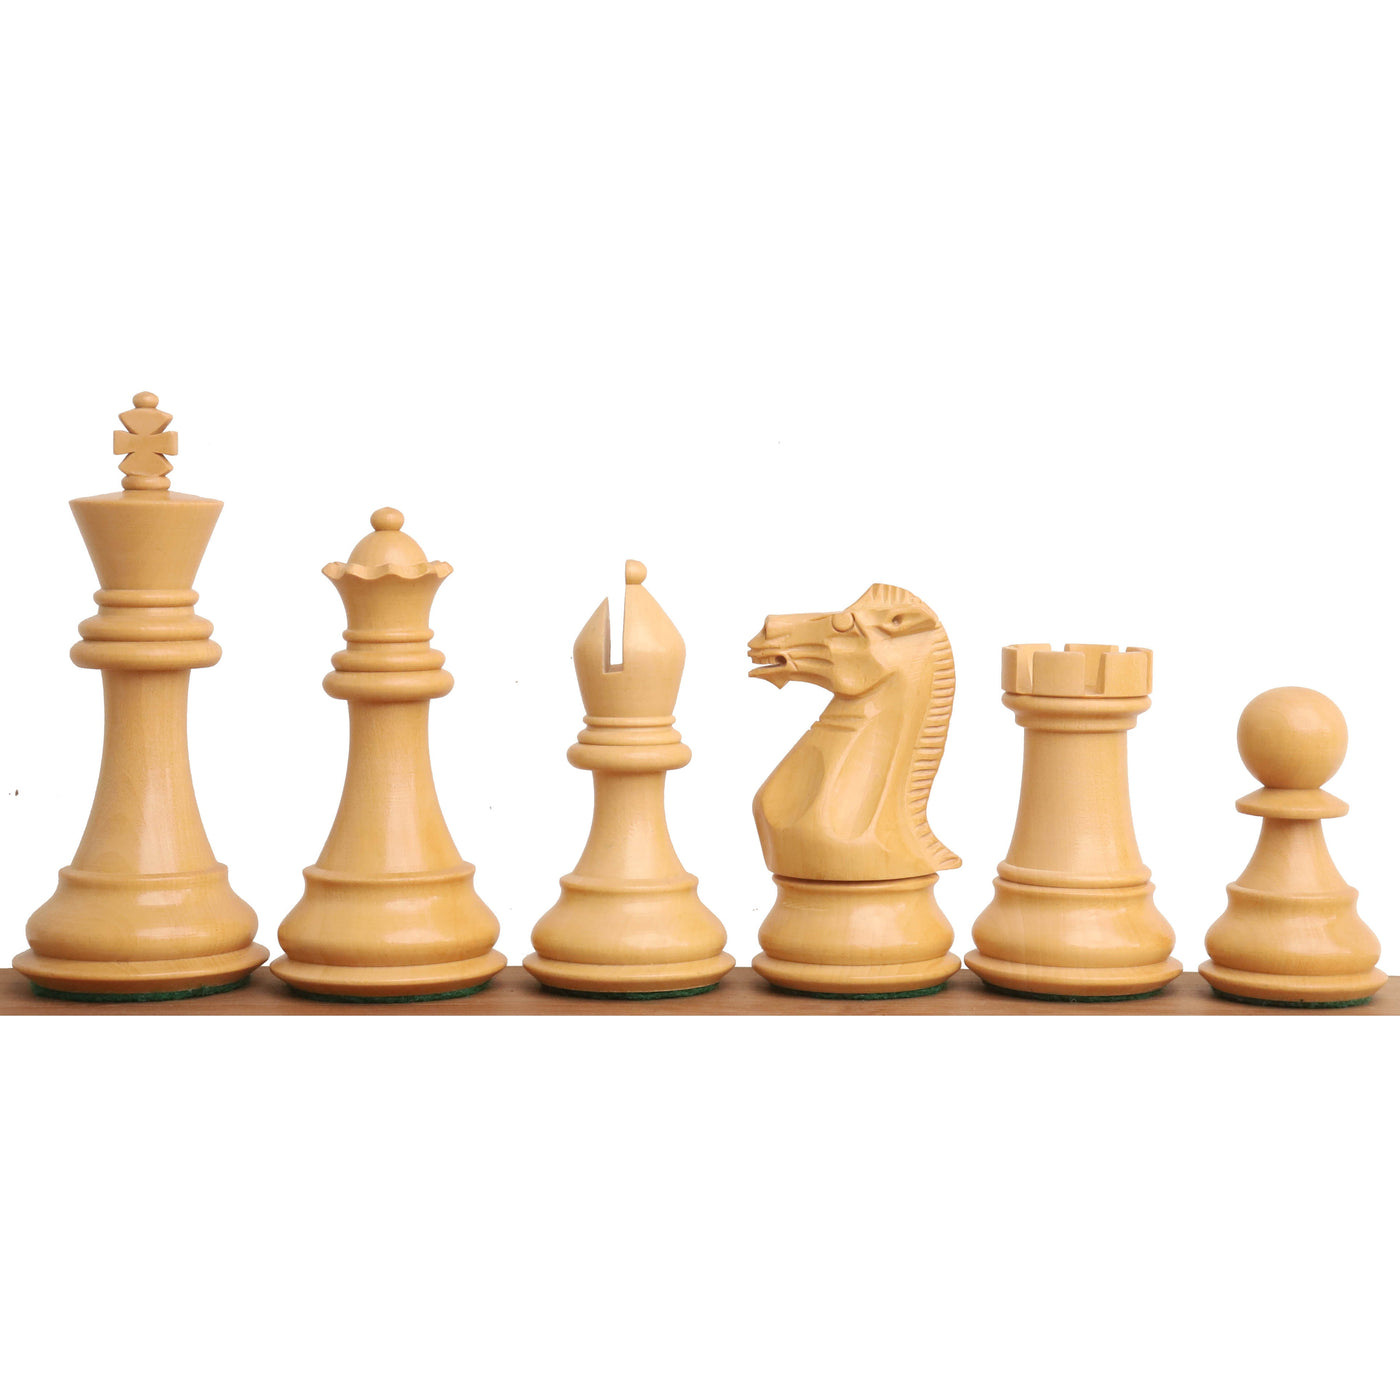 3.9" Professional Staunton Chess Set - Chess Pieces Only - Weighted Budrose wood